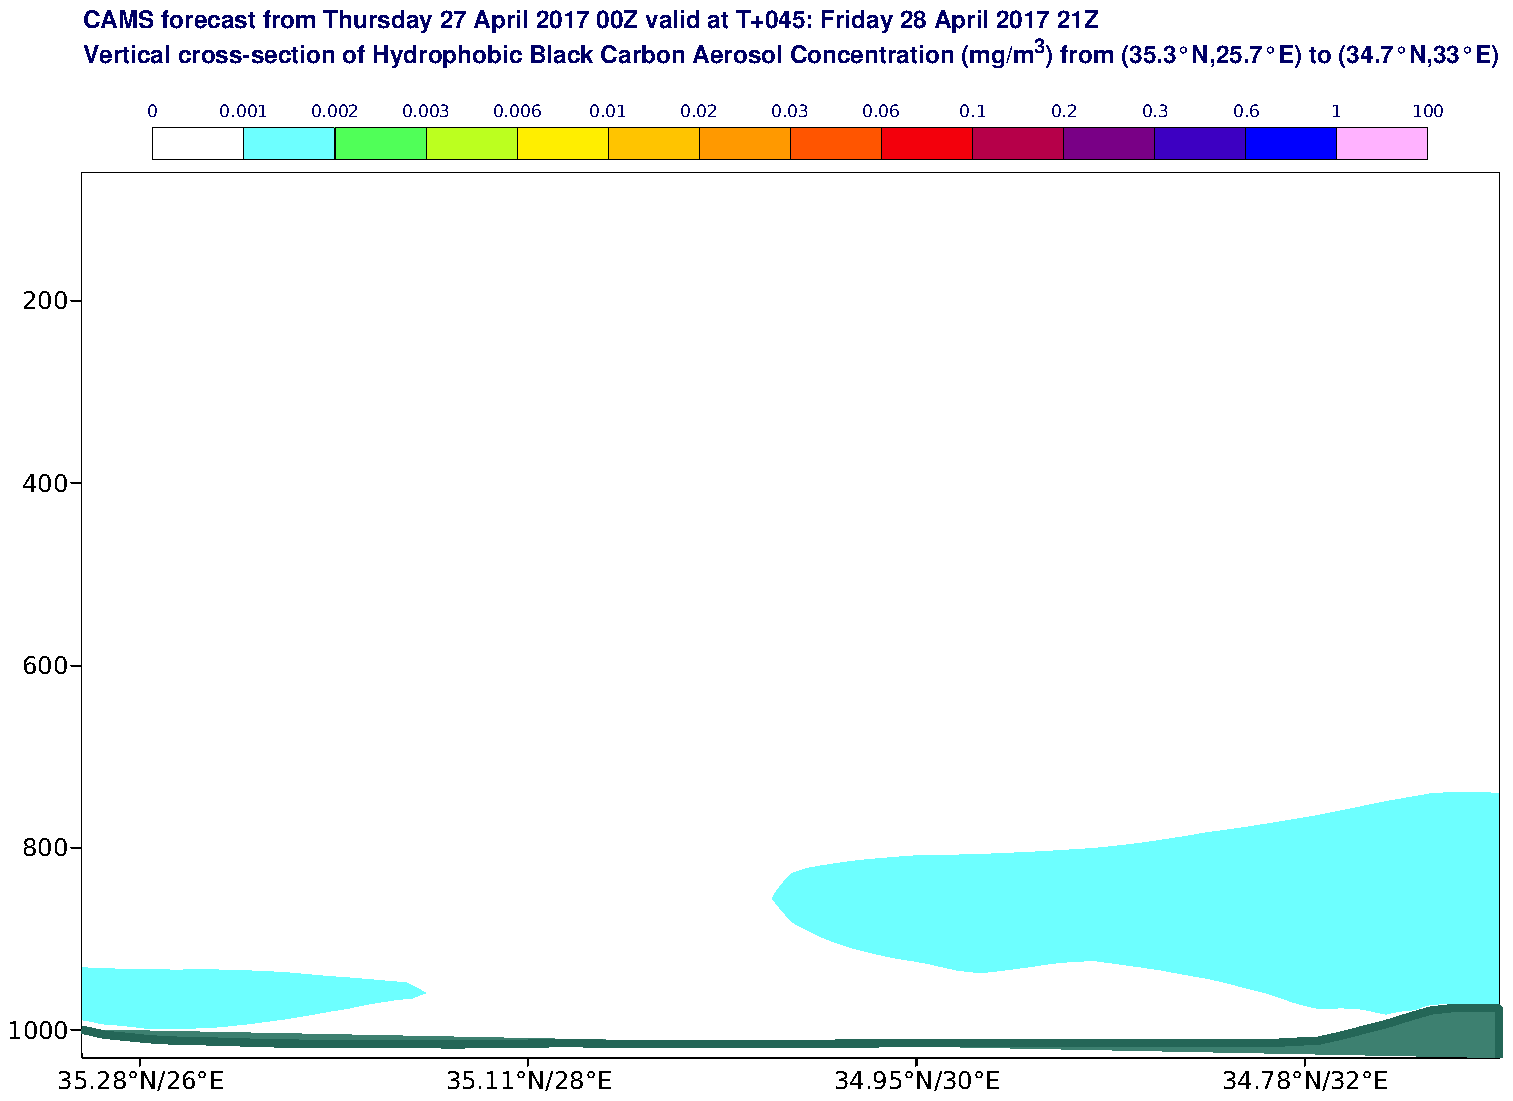 Vertical cross-section of Hydrophobic Black Carbon Aerosol Concentration (mg/m3) valid at T45 - 2017-04-28 21:00